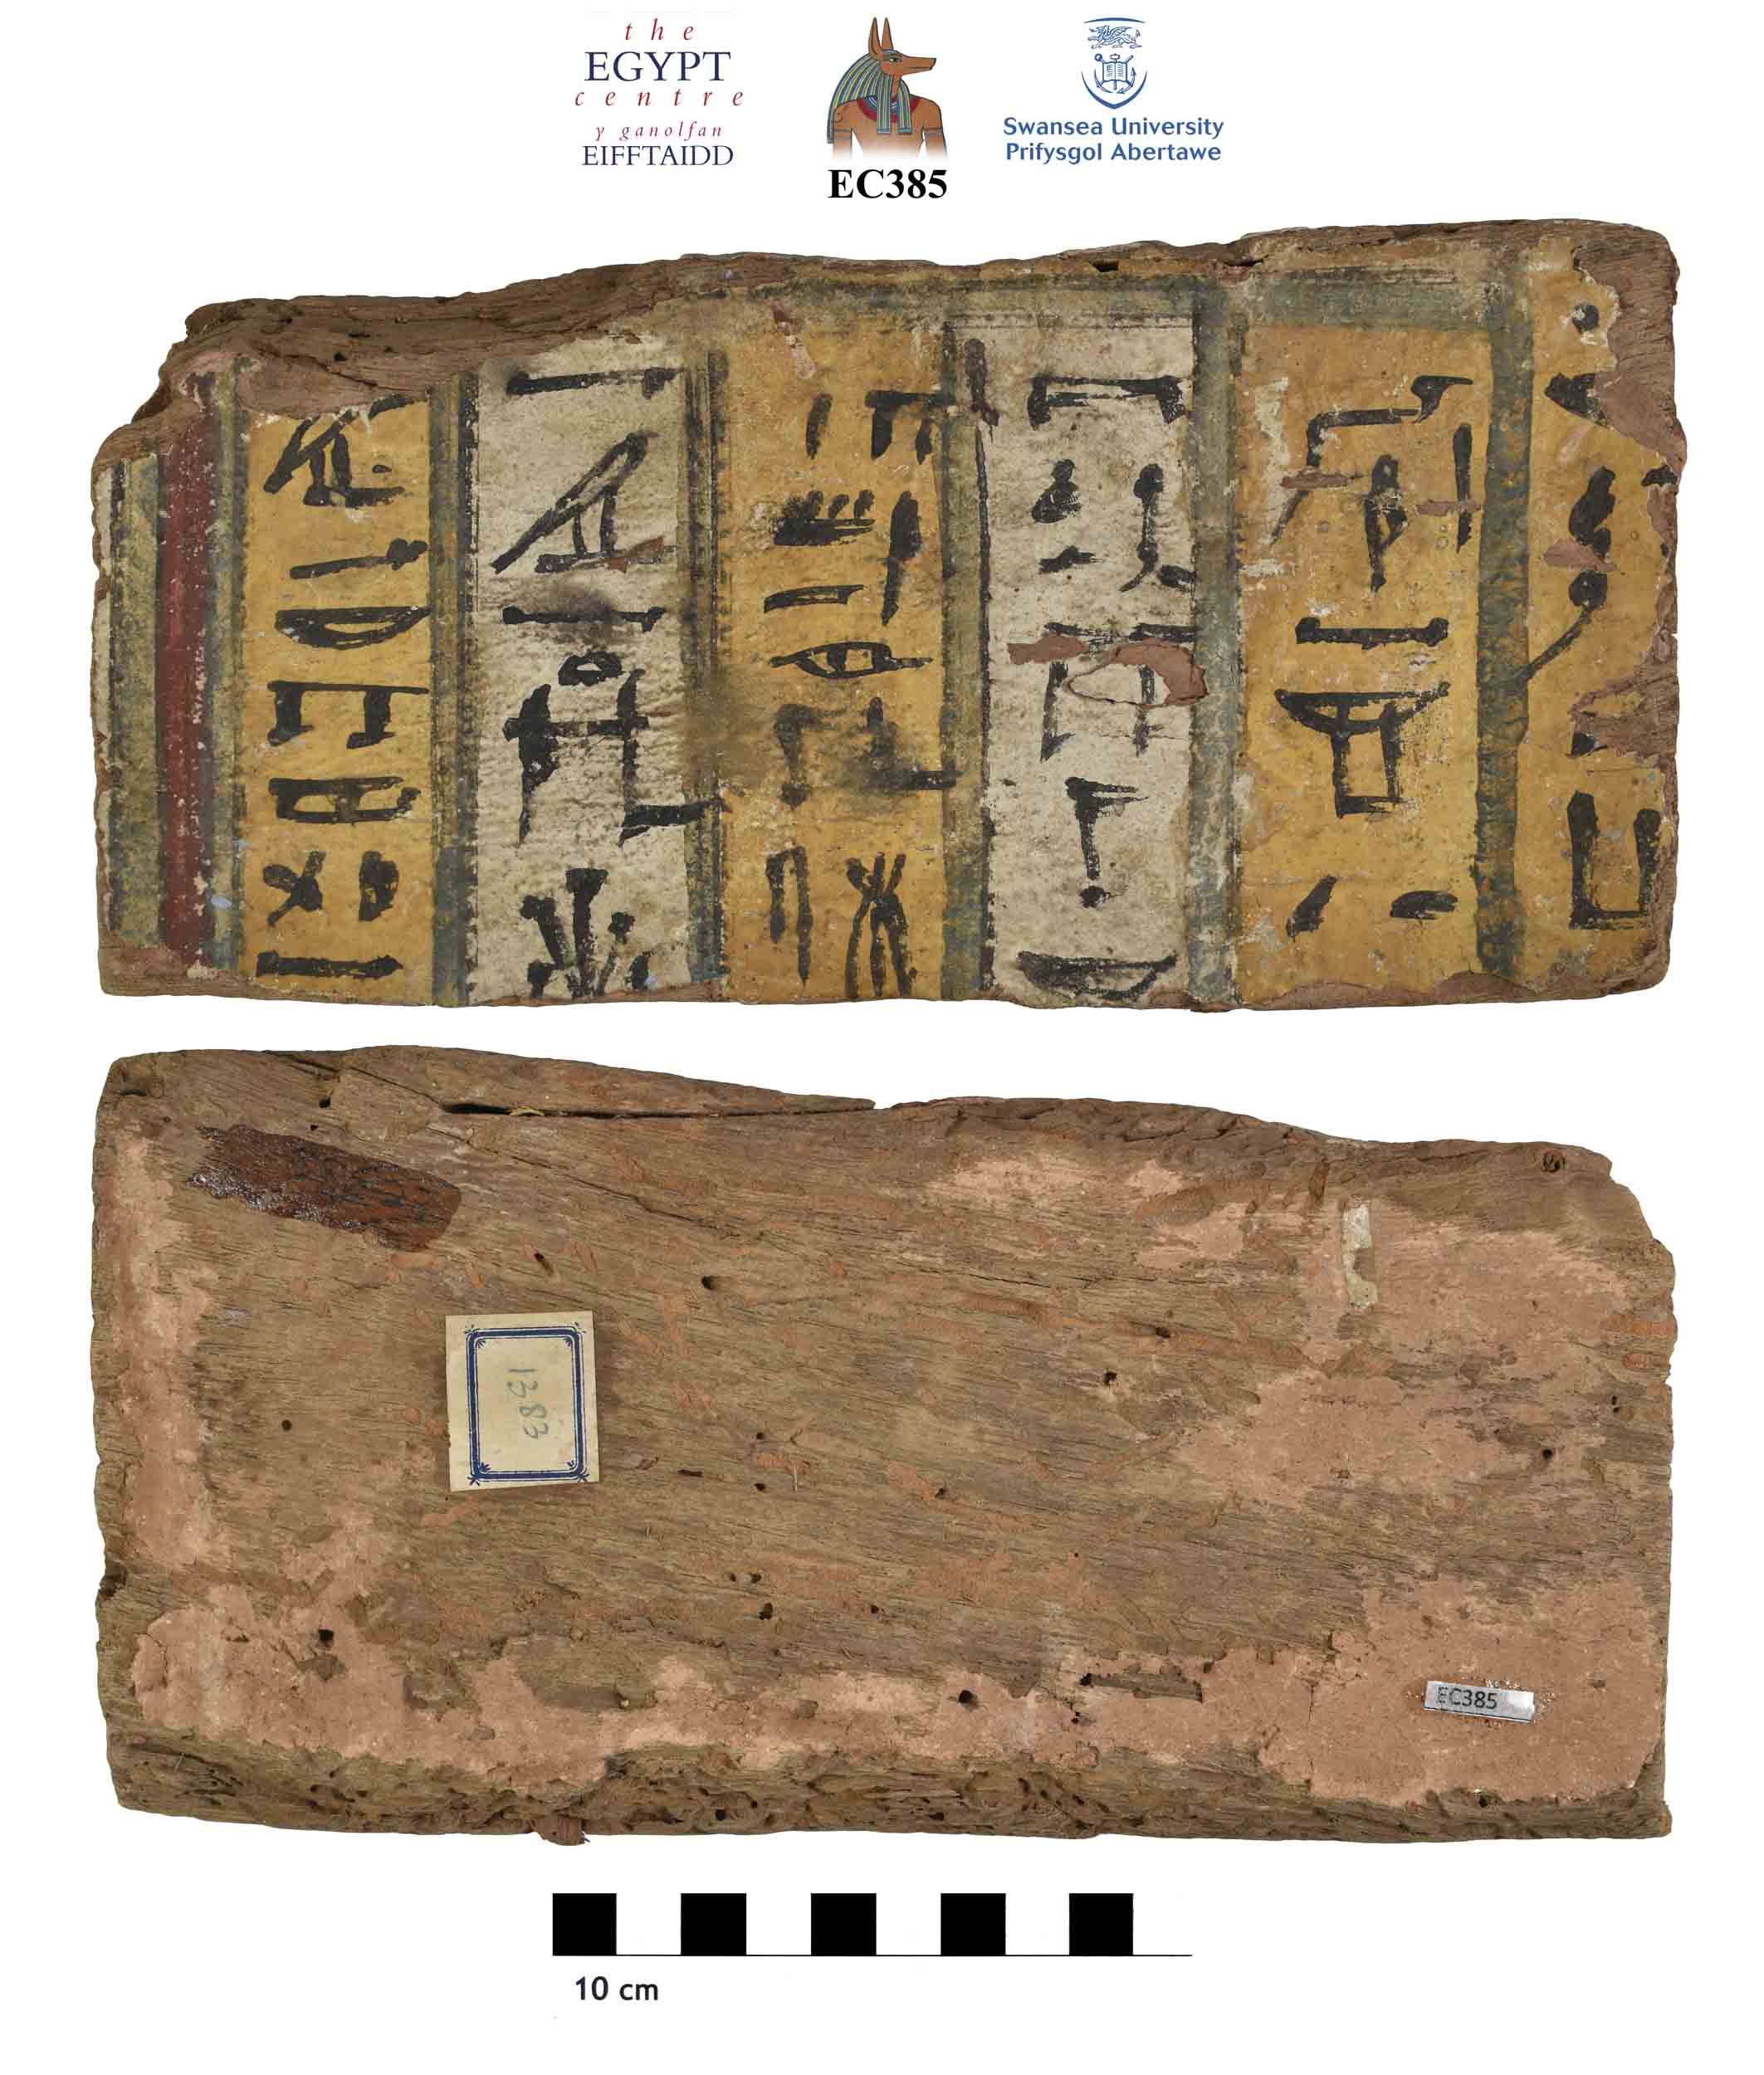 Image for: Coffin Fragment